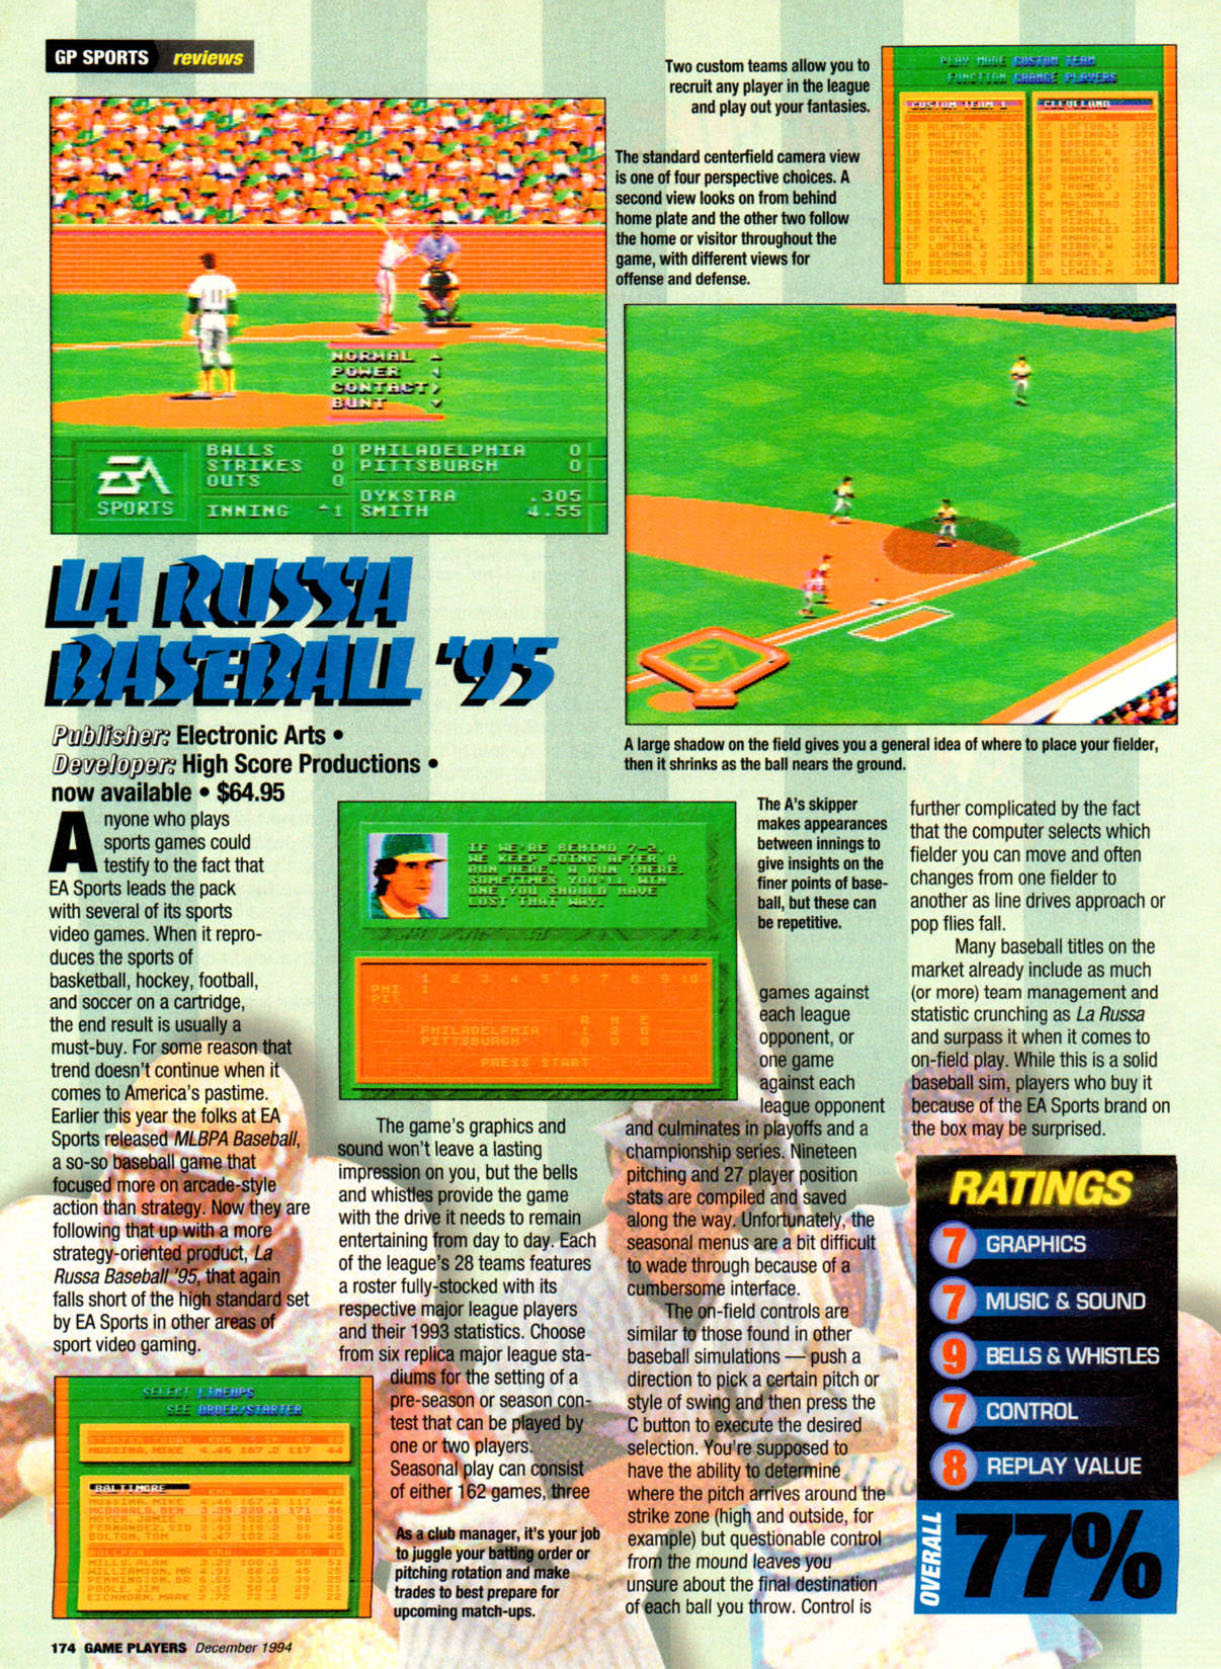 Tony La Russa Baseball '95 Review, Game Players December 1994 page 174